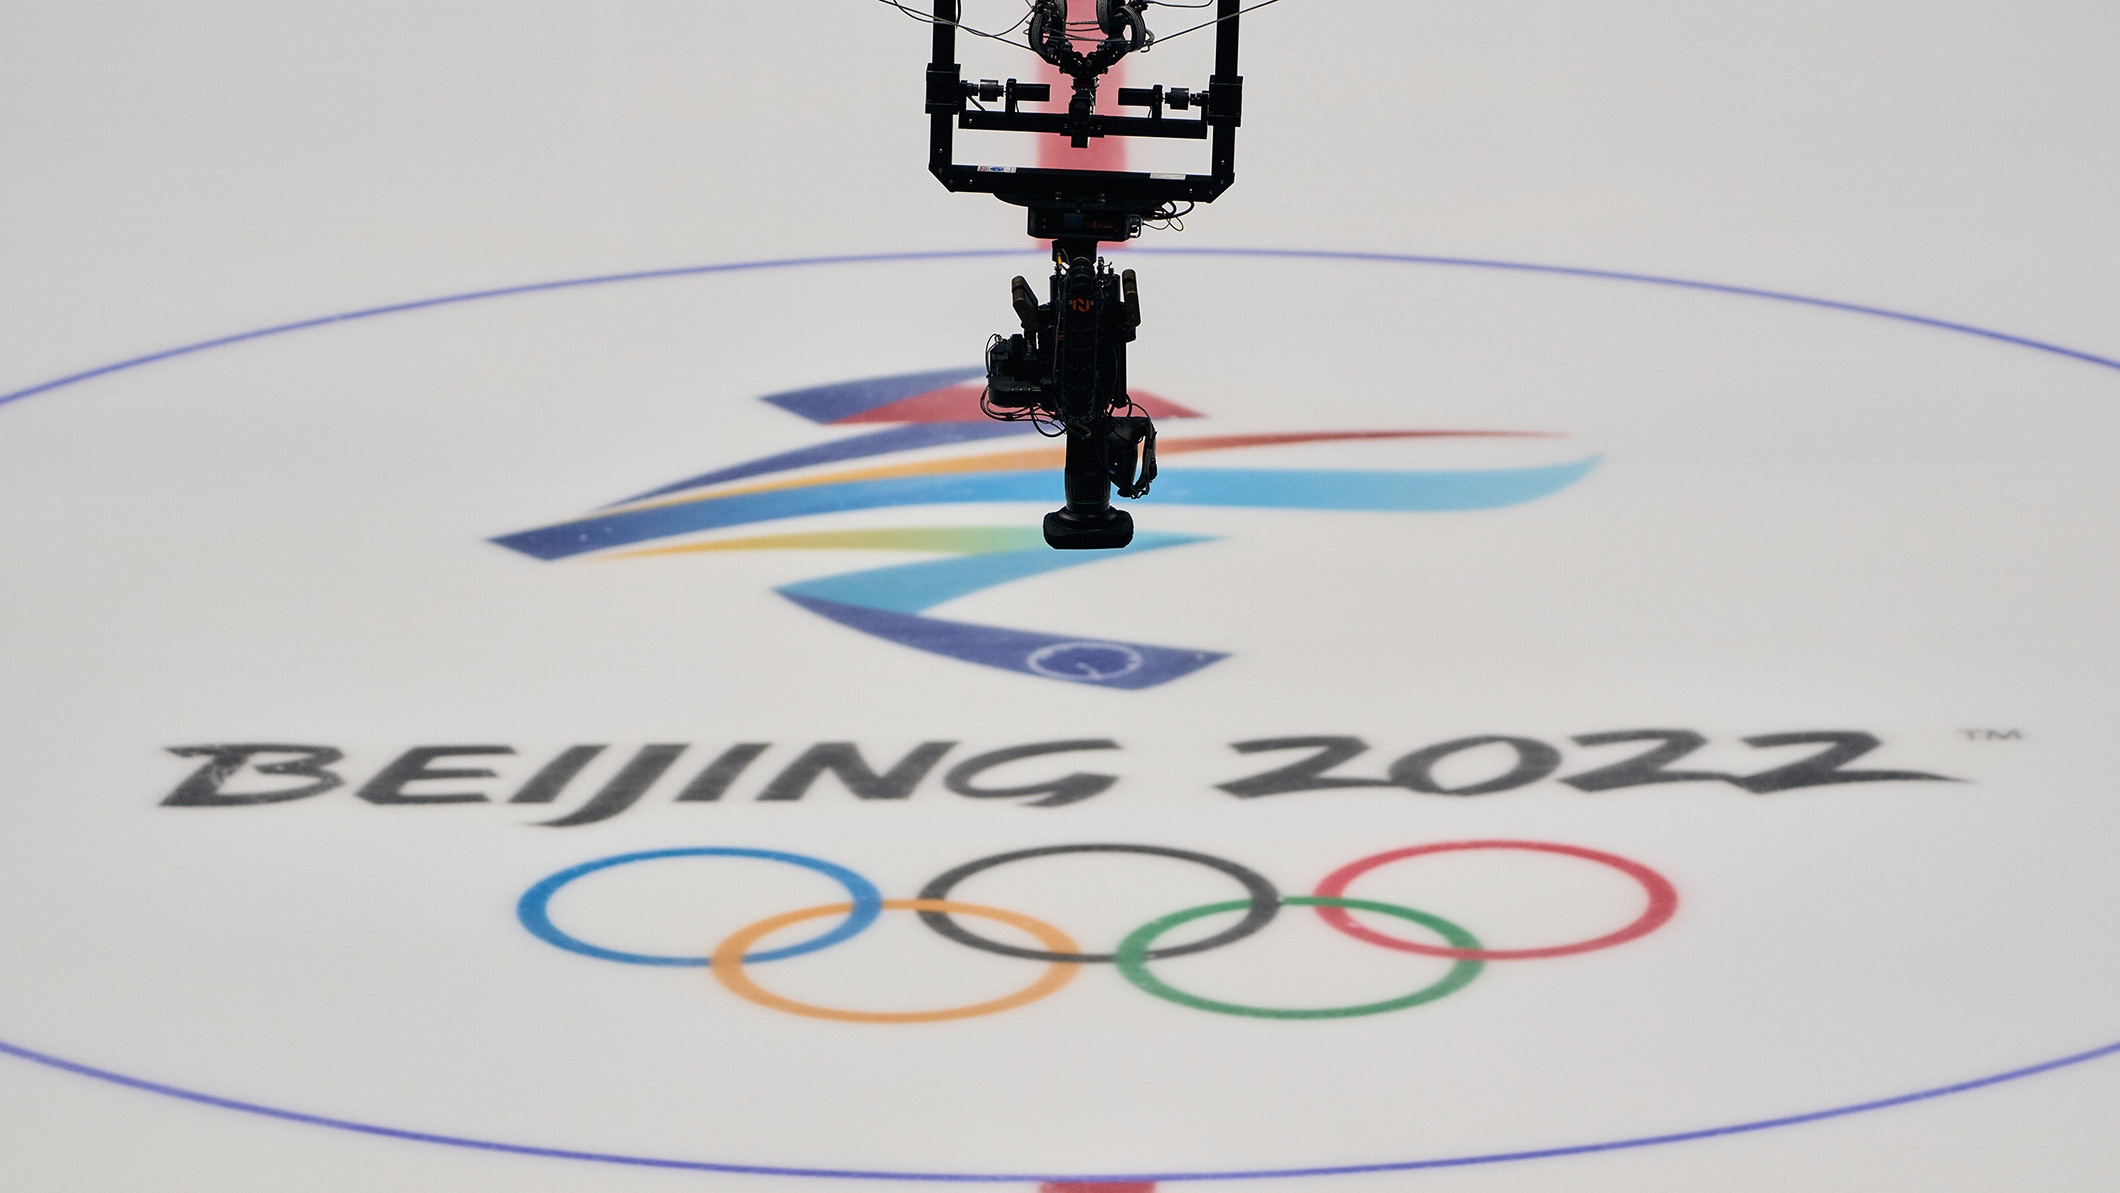 Media workshop: Beijing 2022 – Necessary insights to cover the Olympic  Winter Games